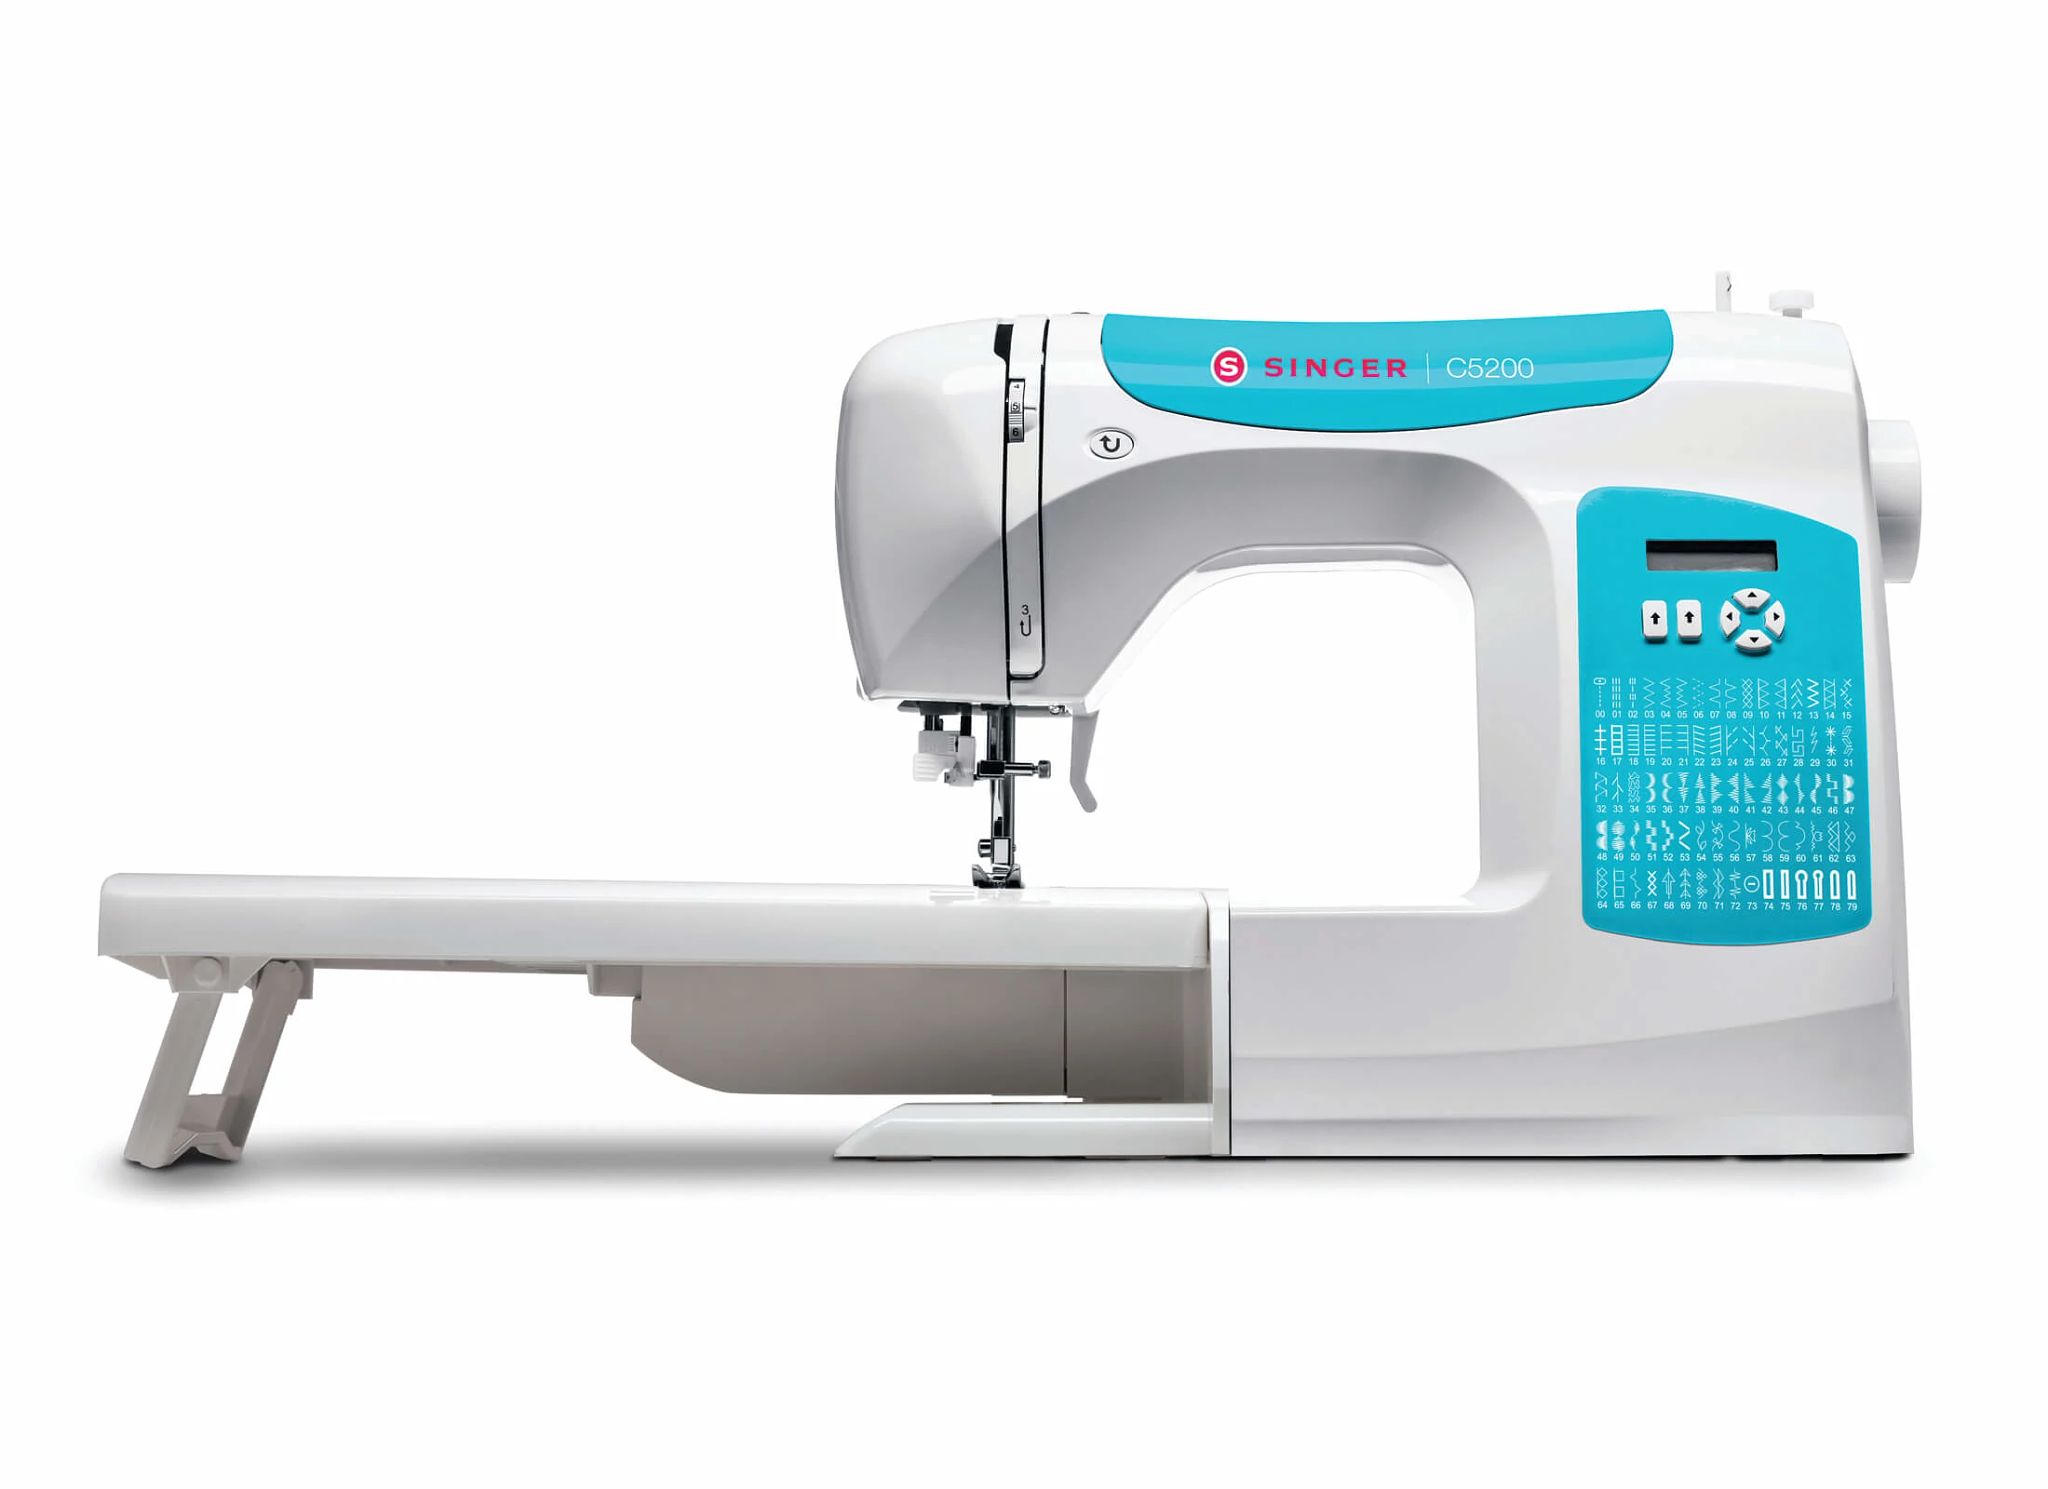 Singer Class 17 Sewing Machines